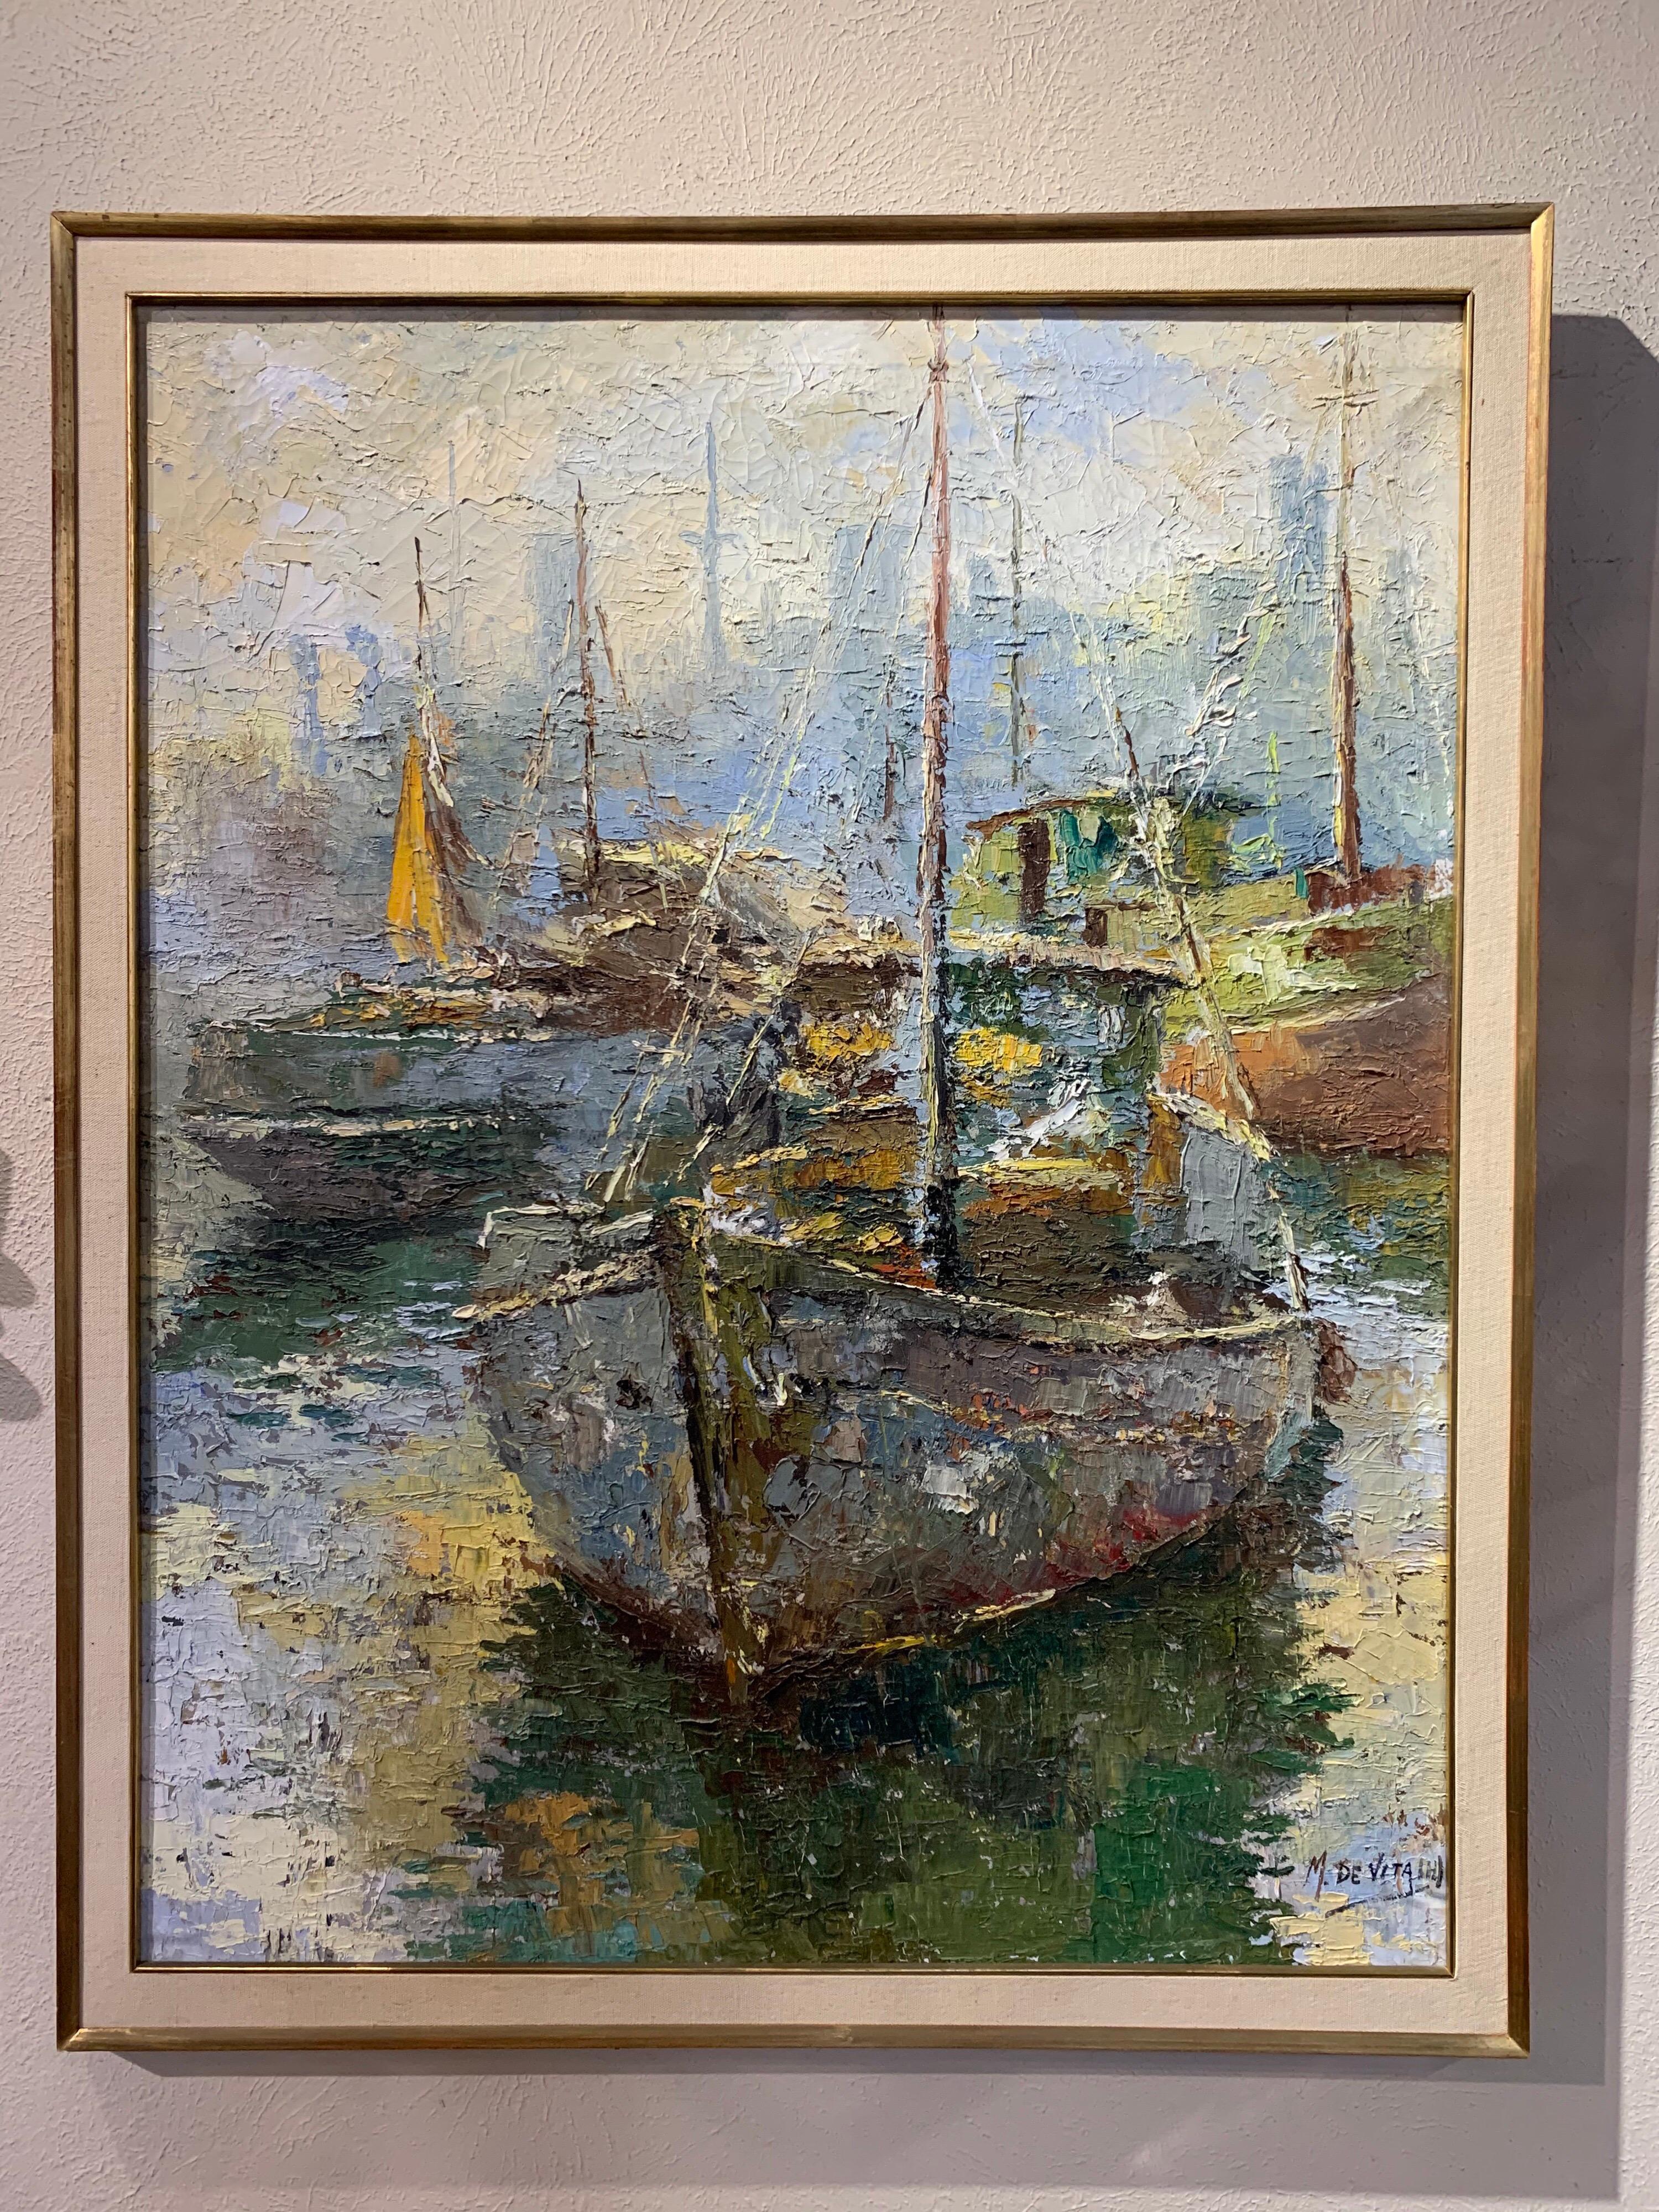 Lovely modern painting of a harbor and boats in a nice frame. Signed by M Devita.